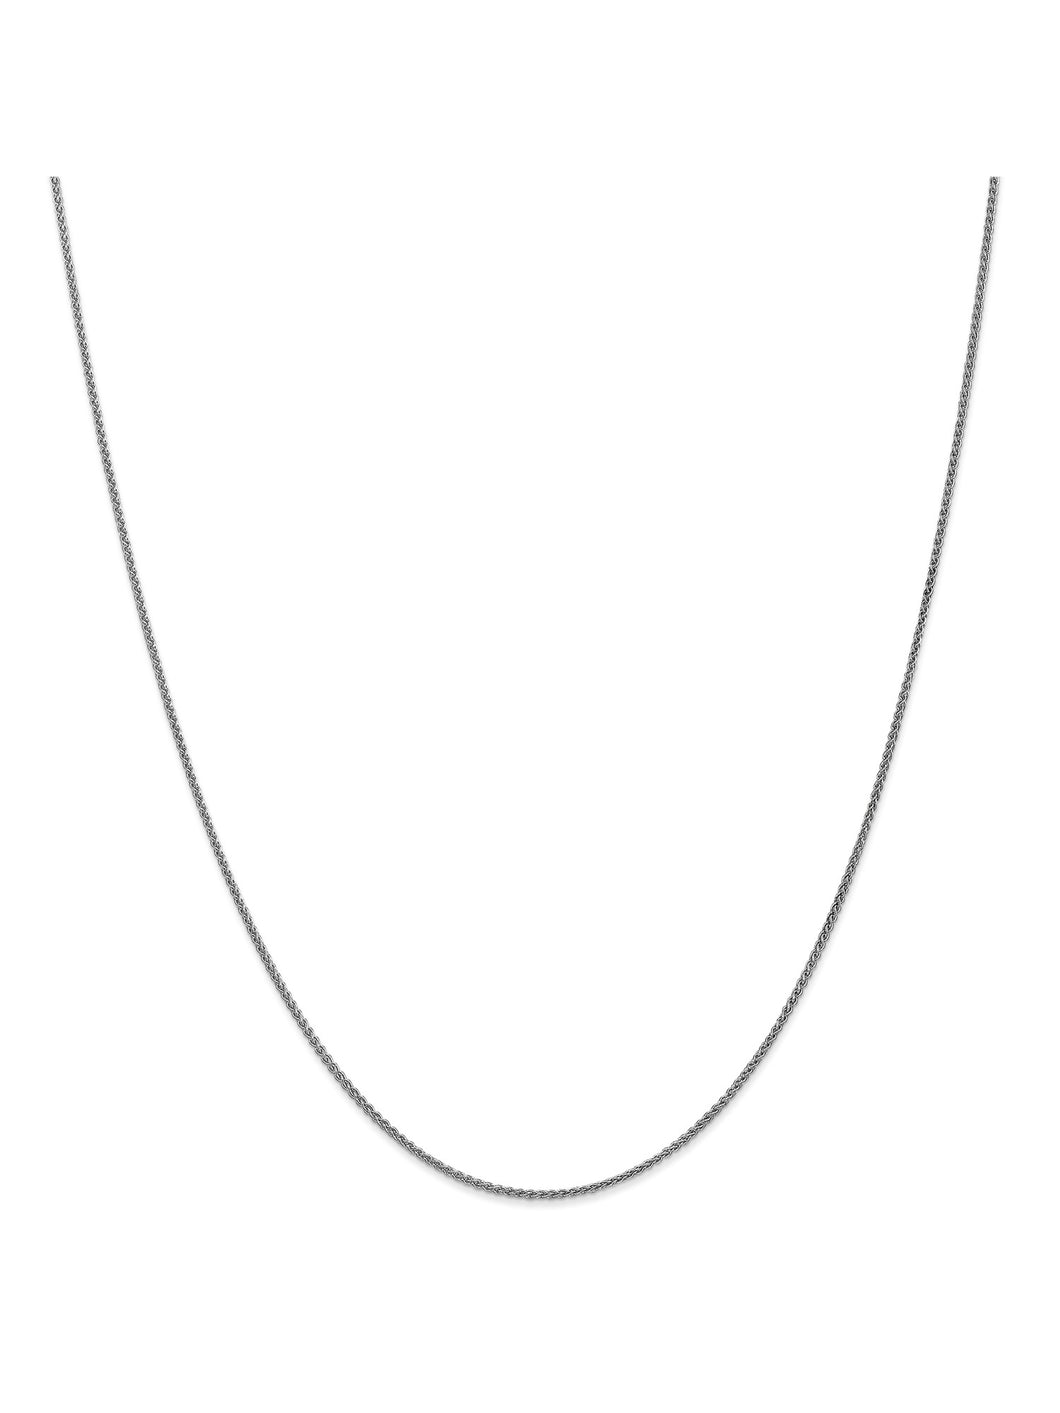 14k White Gold 1.25mm Wide Wheat Chain Necklace